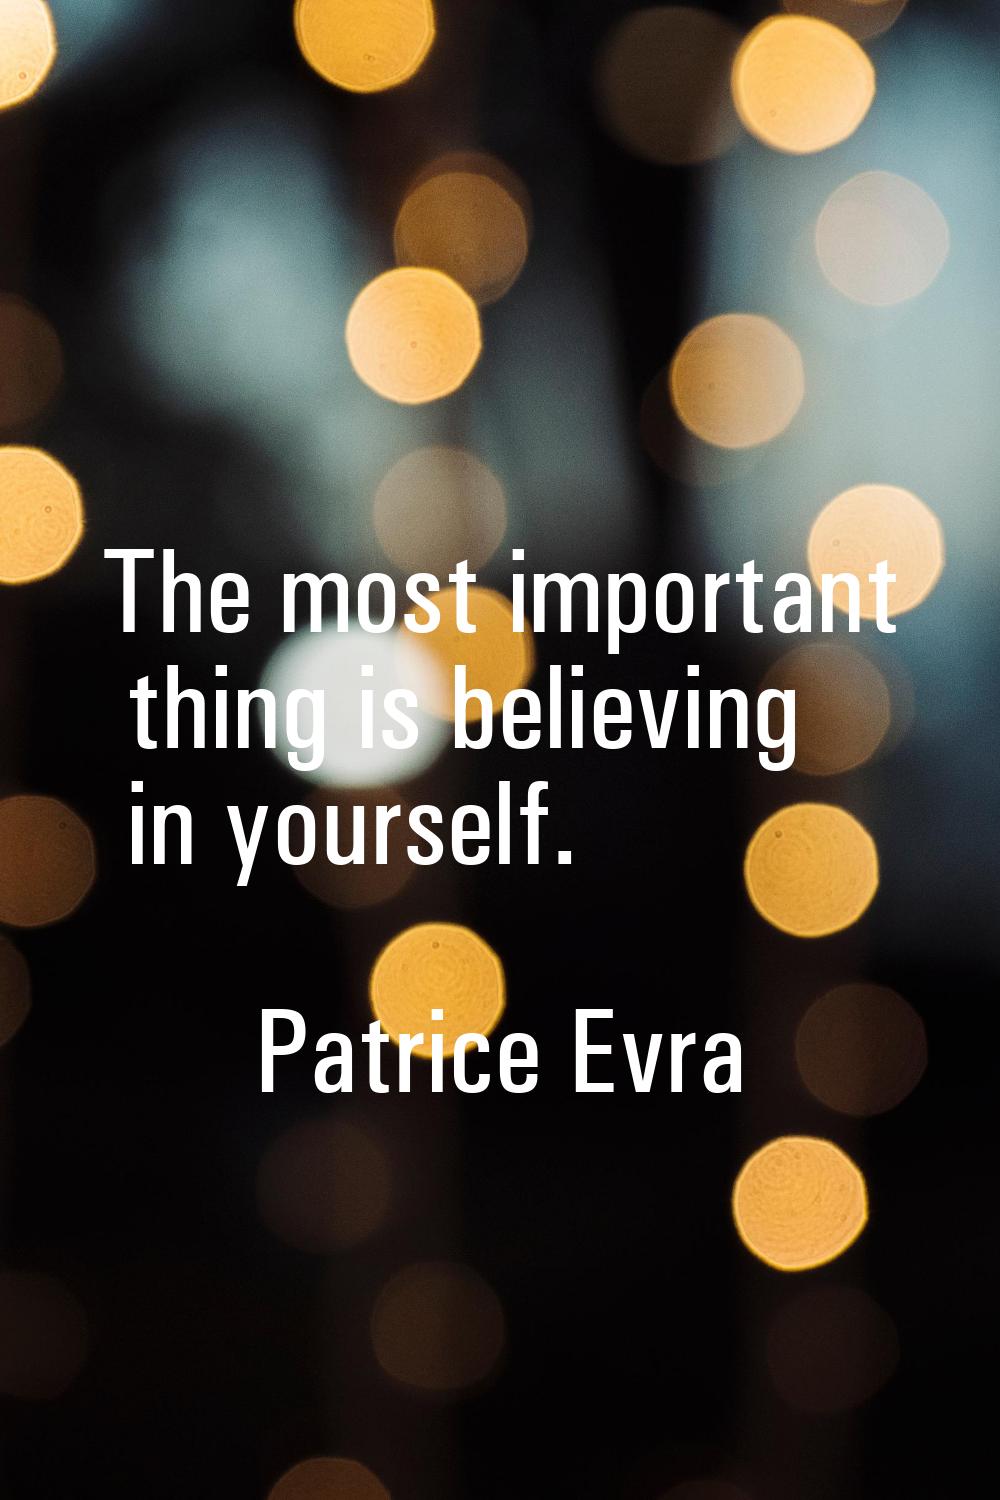 The most important thing is believing in yourself.